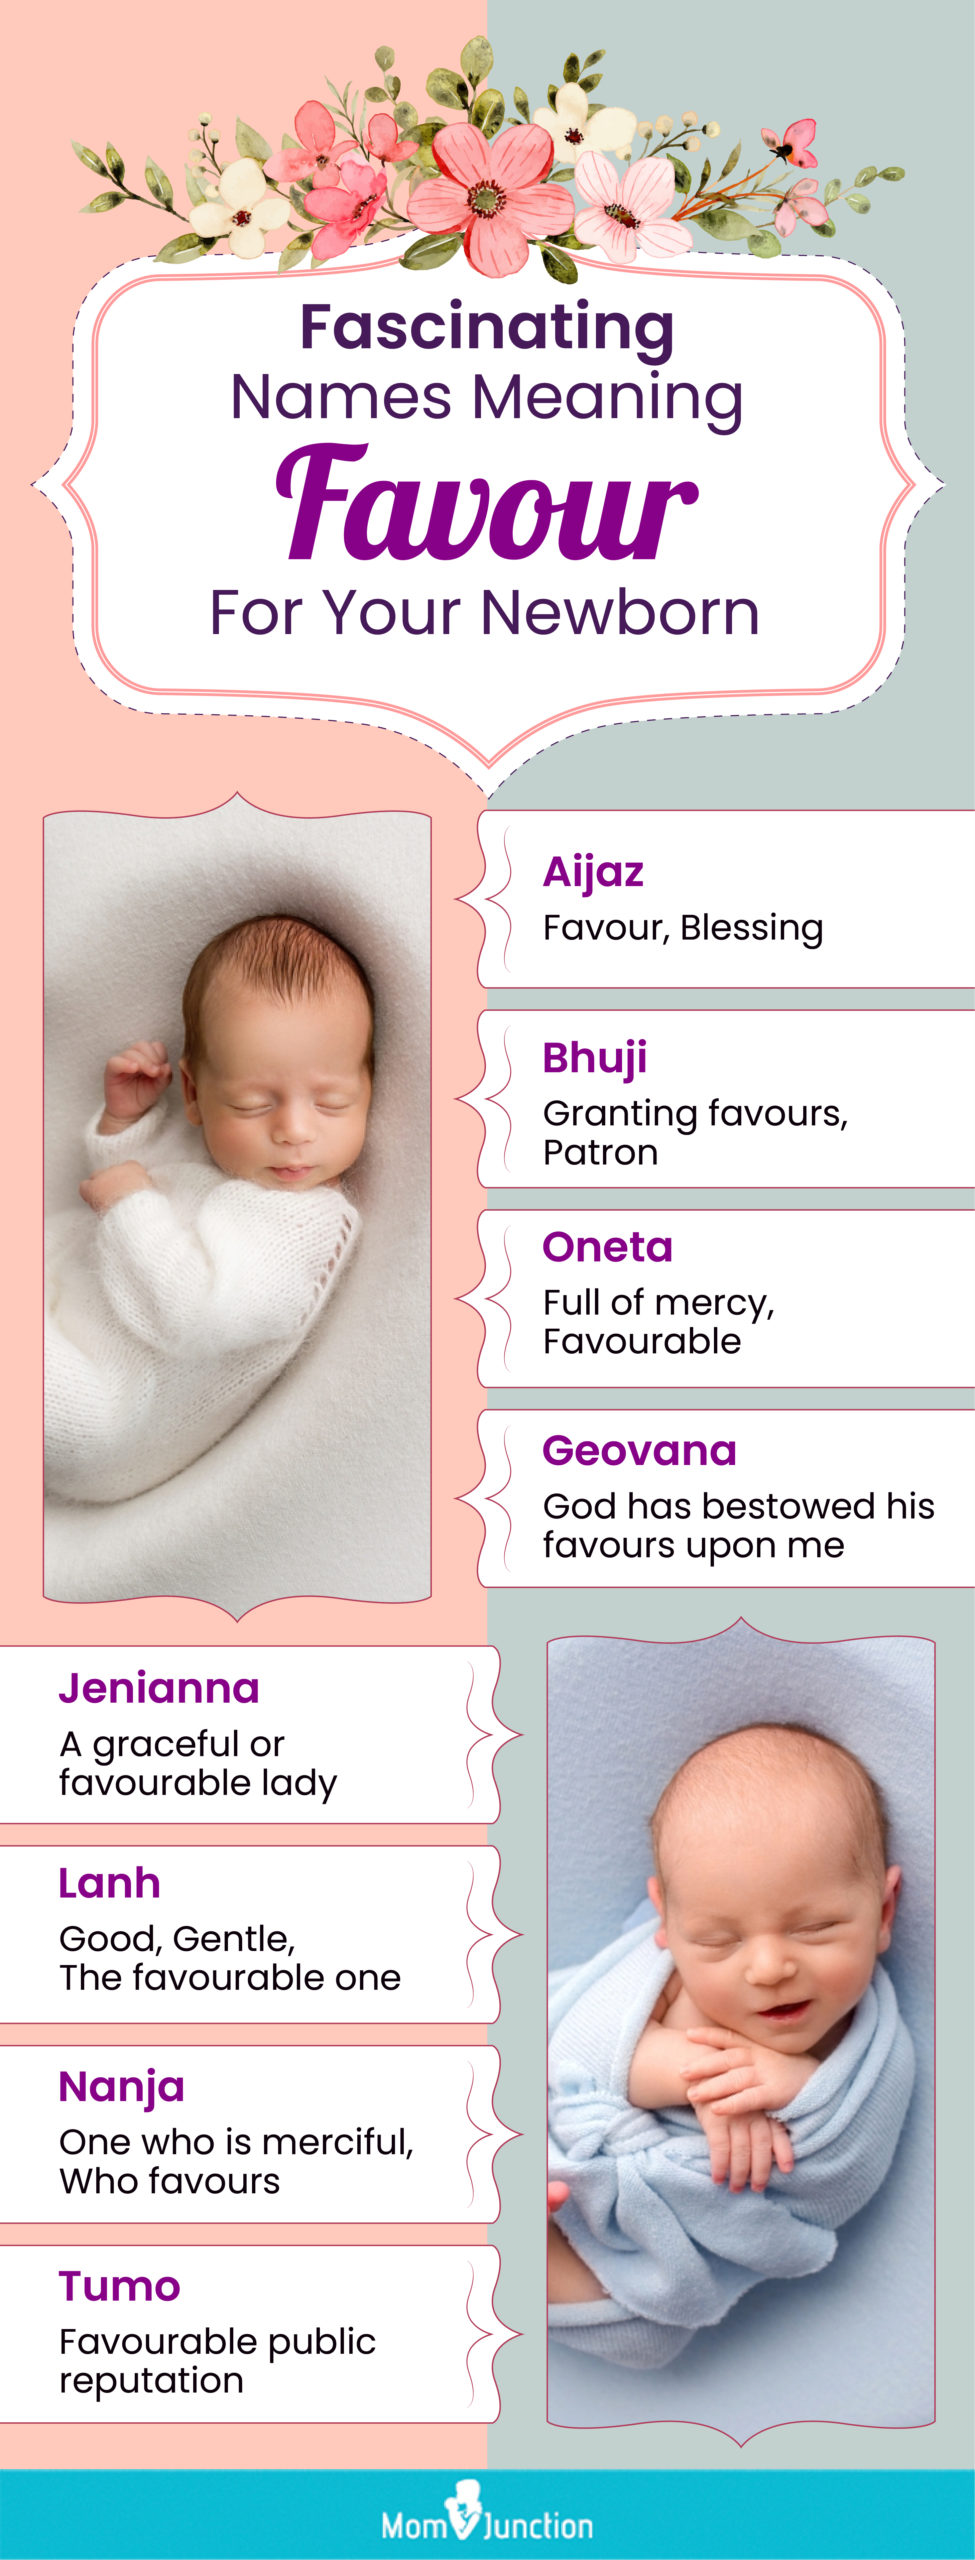 fascinating names meaning favour for your newborn (infographic)